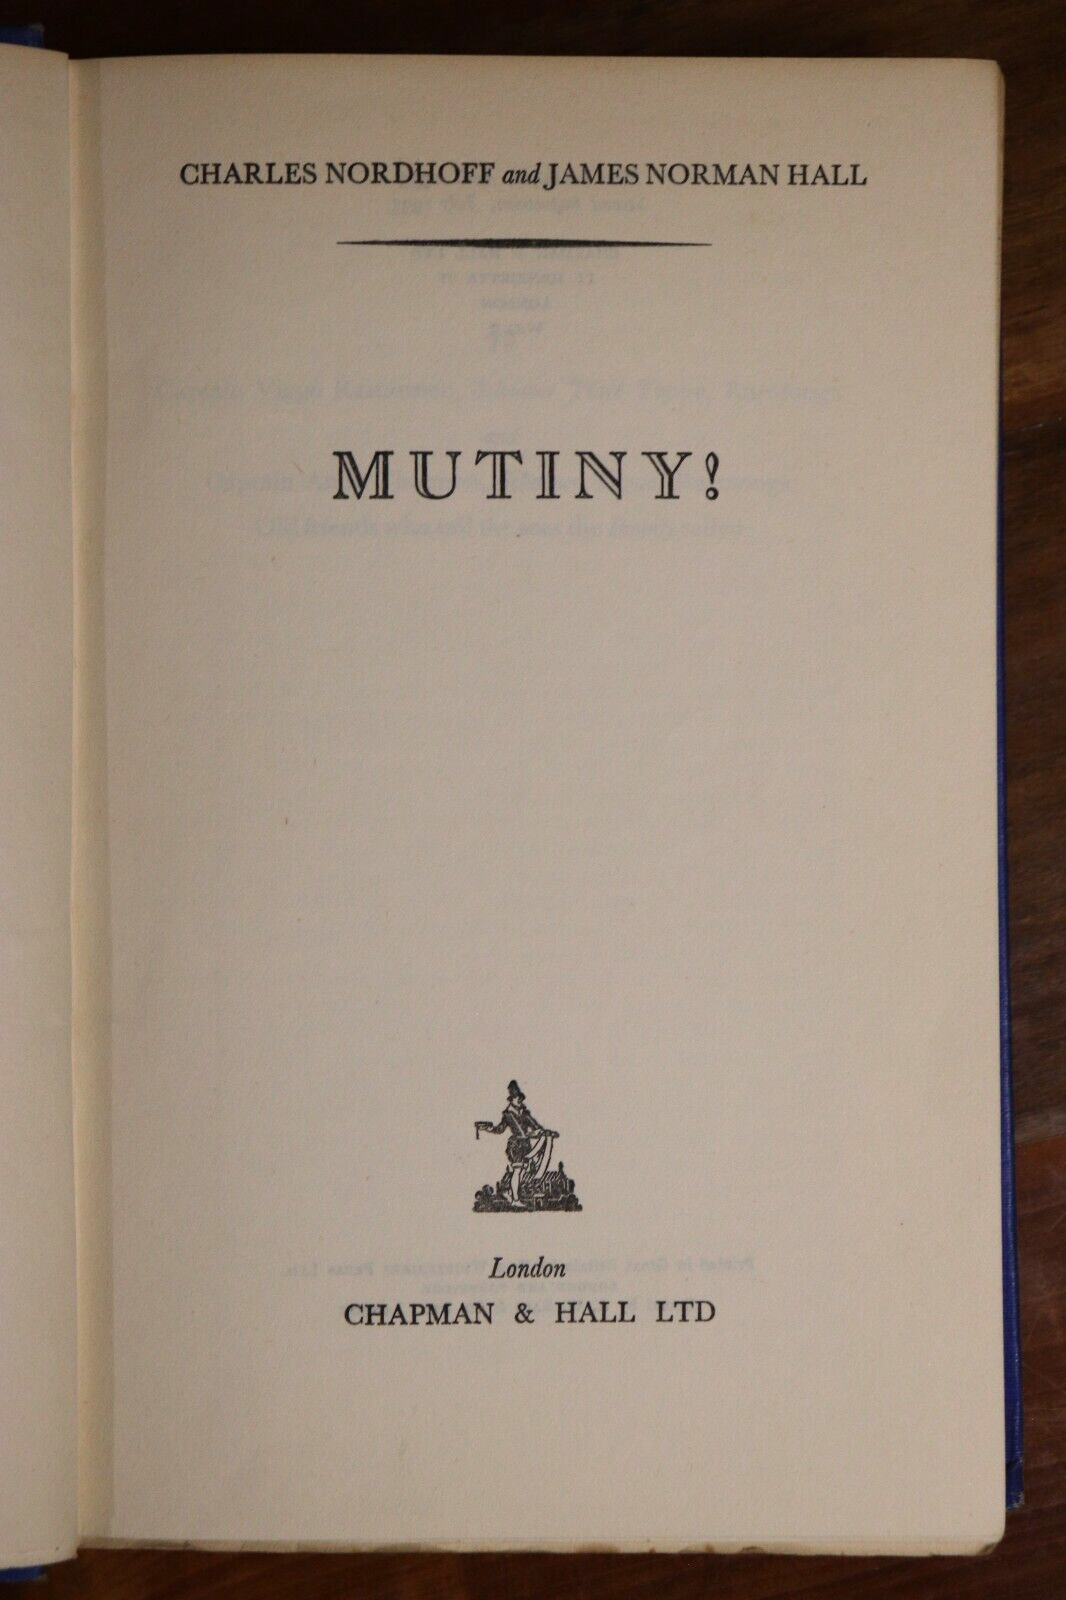 Mutiny! by Charles Nordhoff - 1933 - Antique Travel & Exploration Book - 0